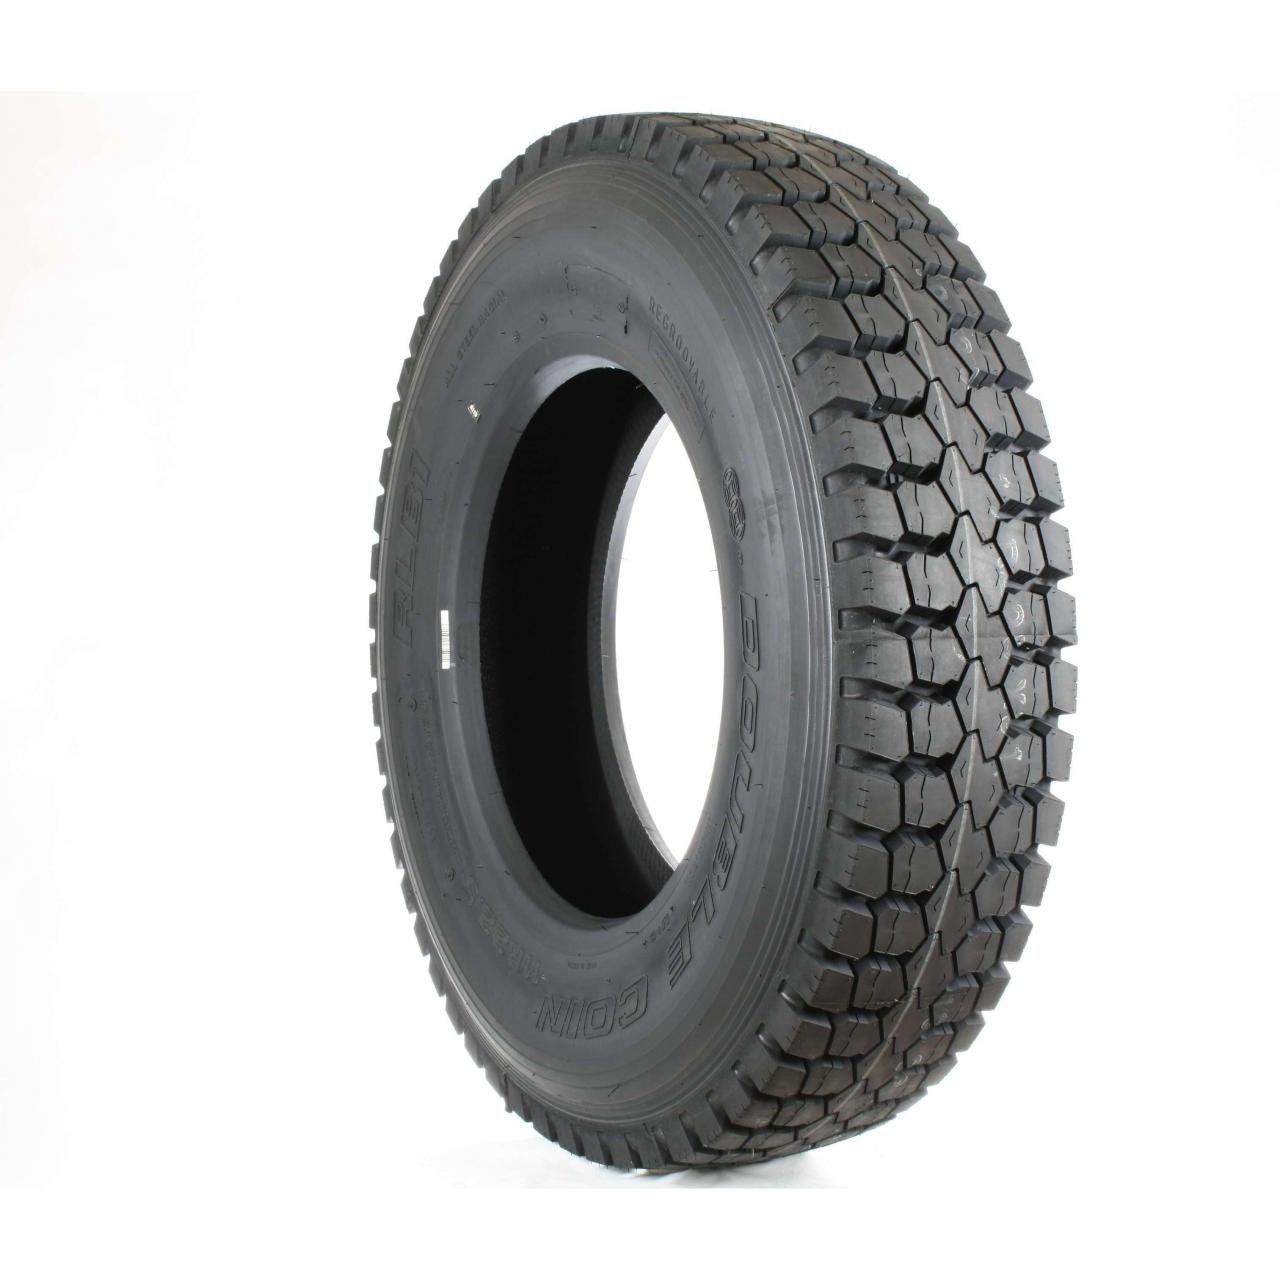 265/70R19.5 16 ply Double Coin RT600 Premium Low Profile  Regional/All-Position Steer Commercial Radial Truck Tire